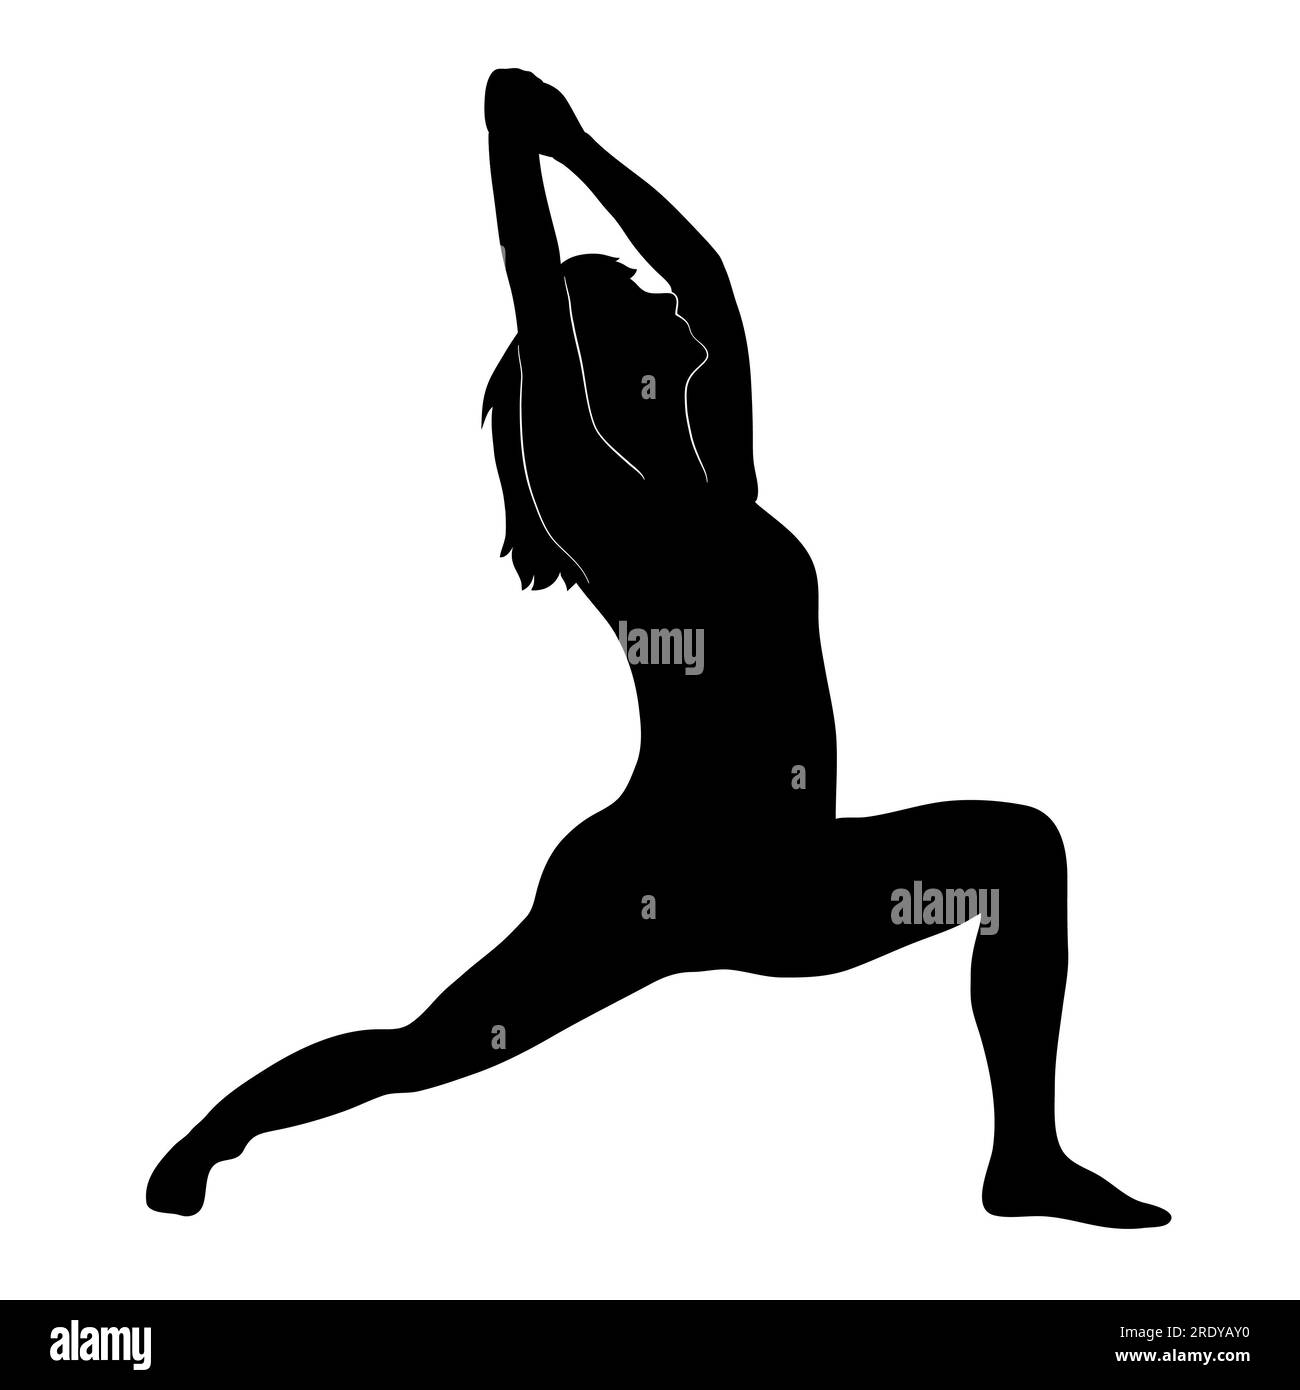 Woman girl person doing a yoga pose in black and white shadow silhouette. Person stretching in a Warrior A pose asanas style. Stock Photo